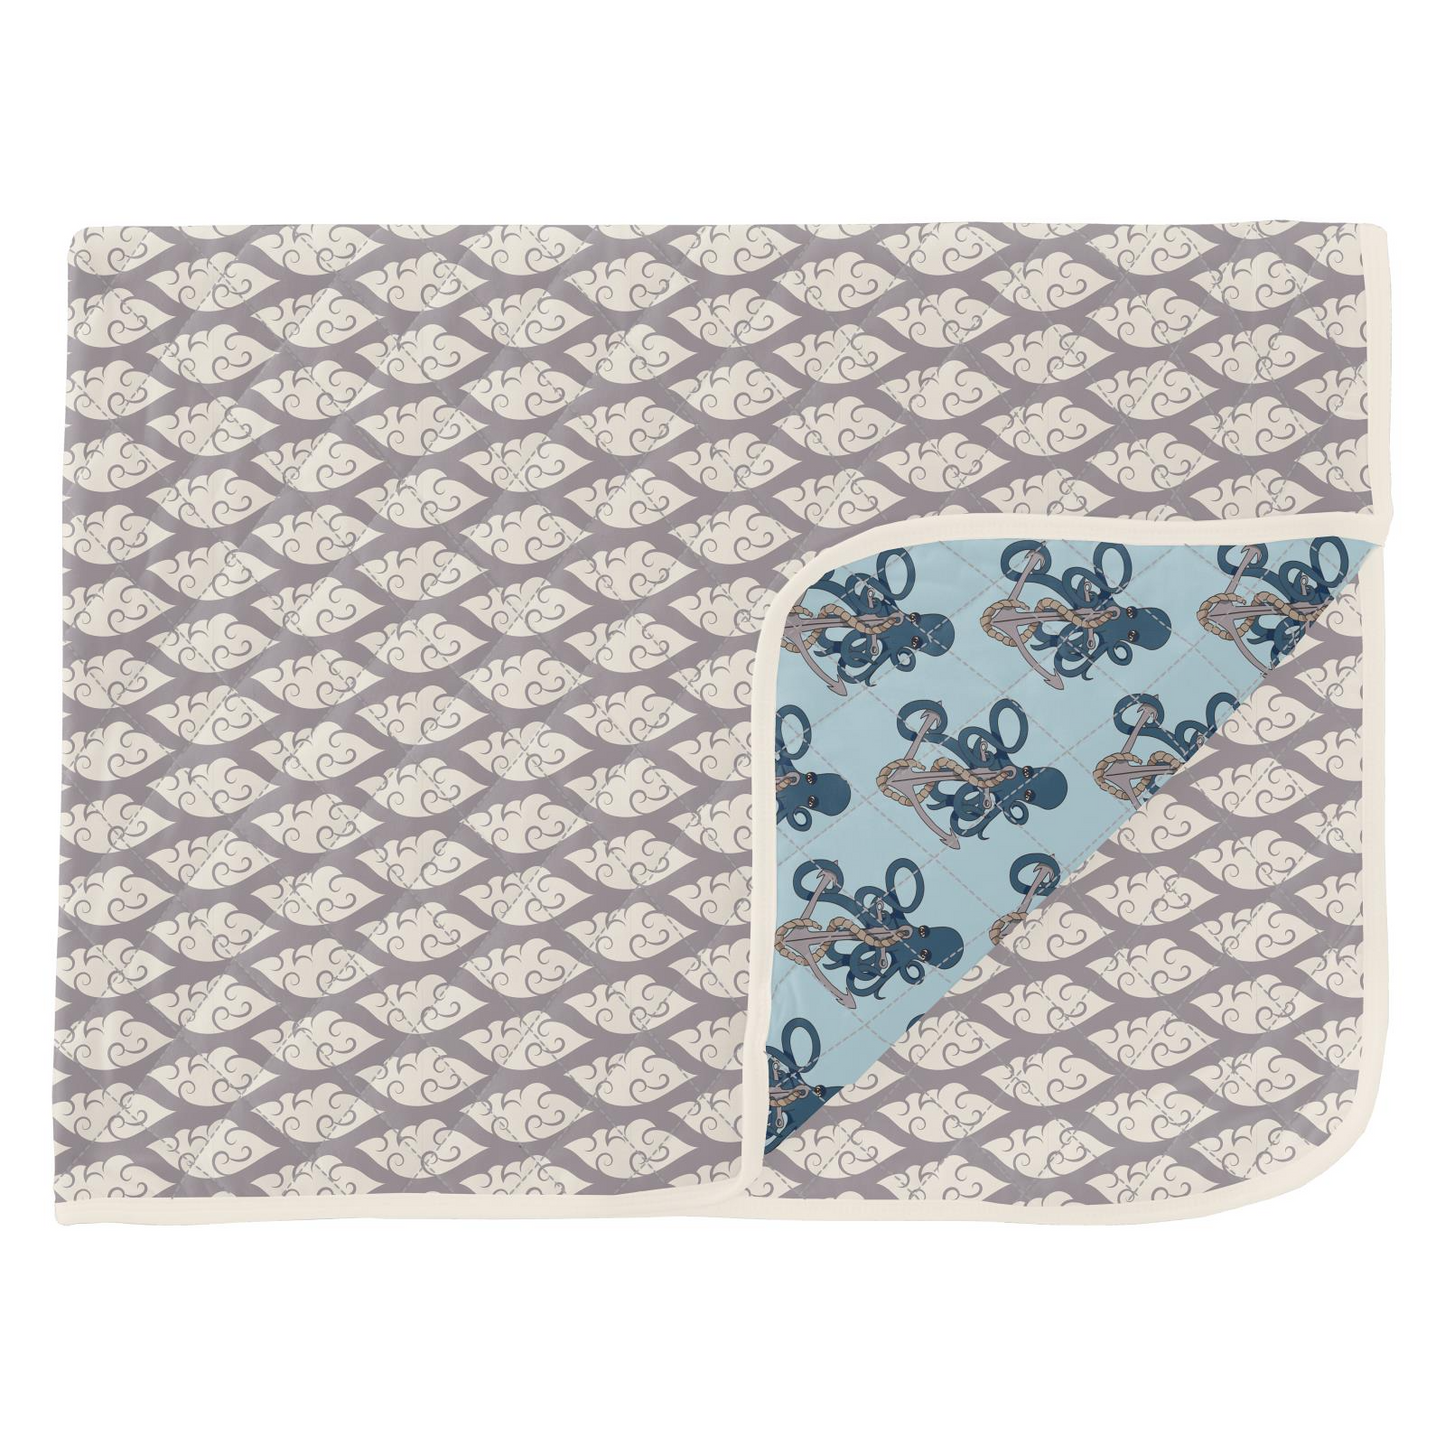 Kickee Pants Print Quilted Throw Blanket: Feather Cloudy Sea/Spring Sky Octopus Anchor